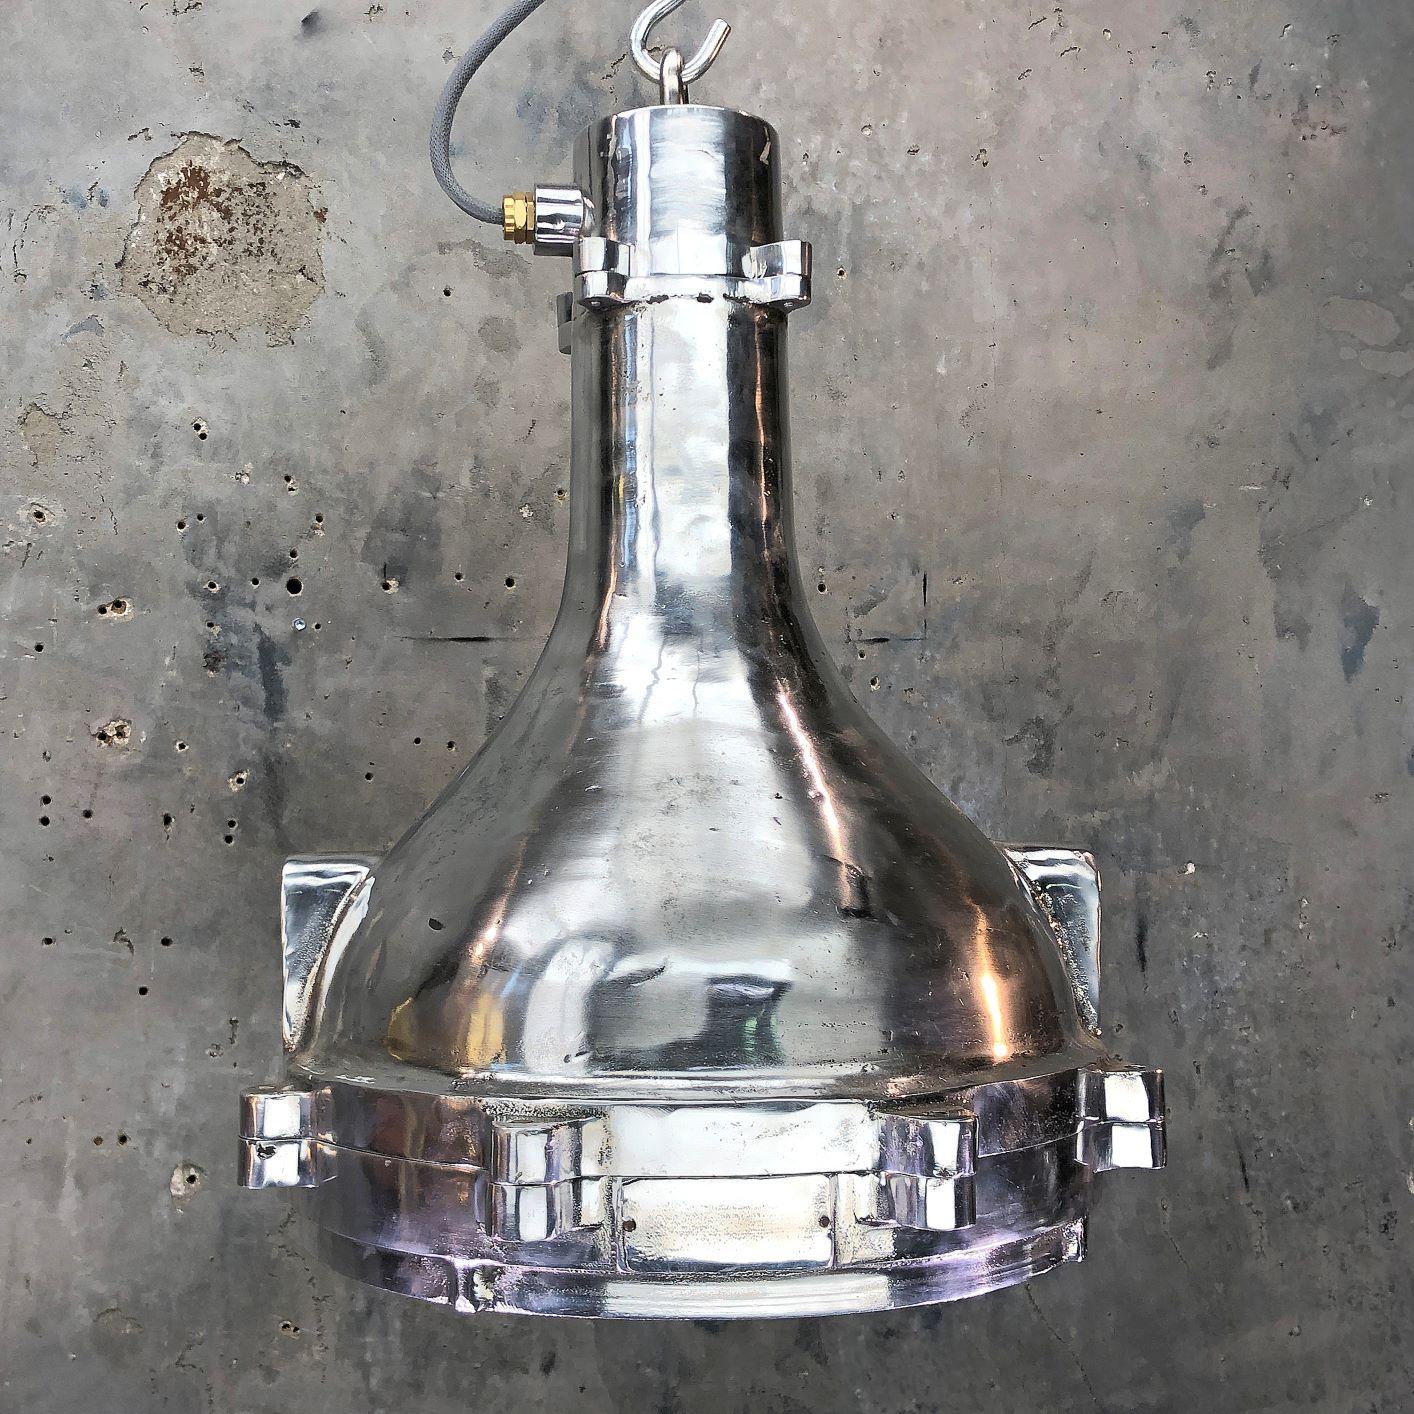 1980s aluminum industrial engine room ceiling pendant with tempered glass cover. Reclaimed from decommissioned ships and professionally restored by Loomlight in UK ready for modern interiors.

Rated: IP55
Weight: 18kg

All lights are